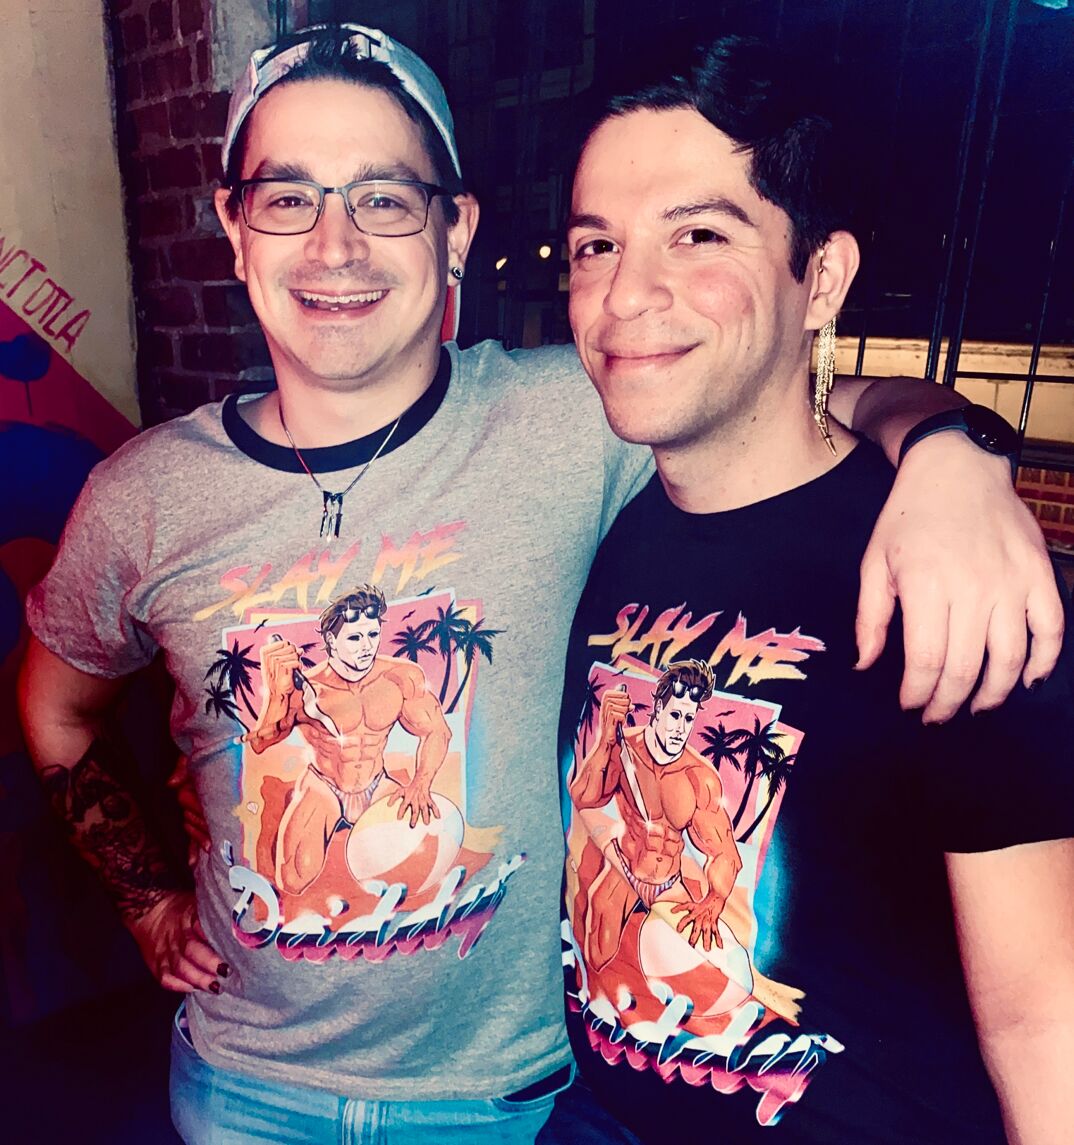 Mario and Nick, a cute queer couple in matching "Slay Me Daddy" shirts.